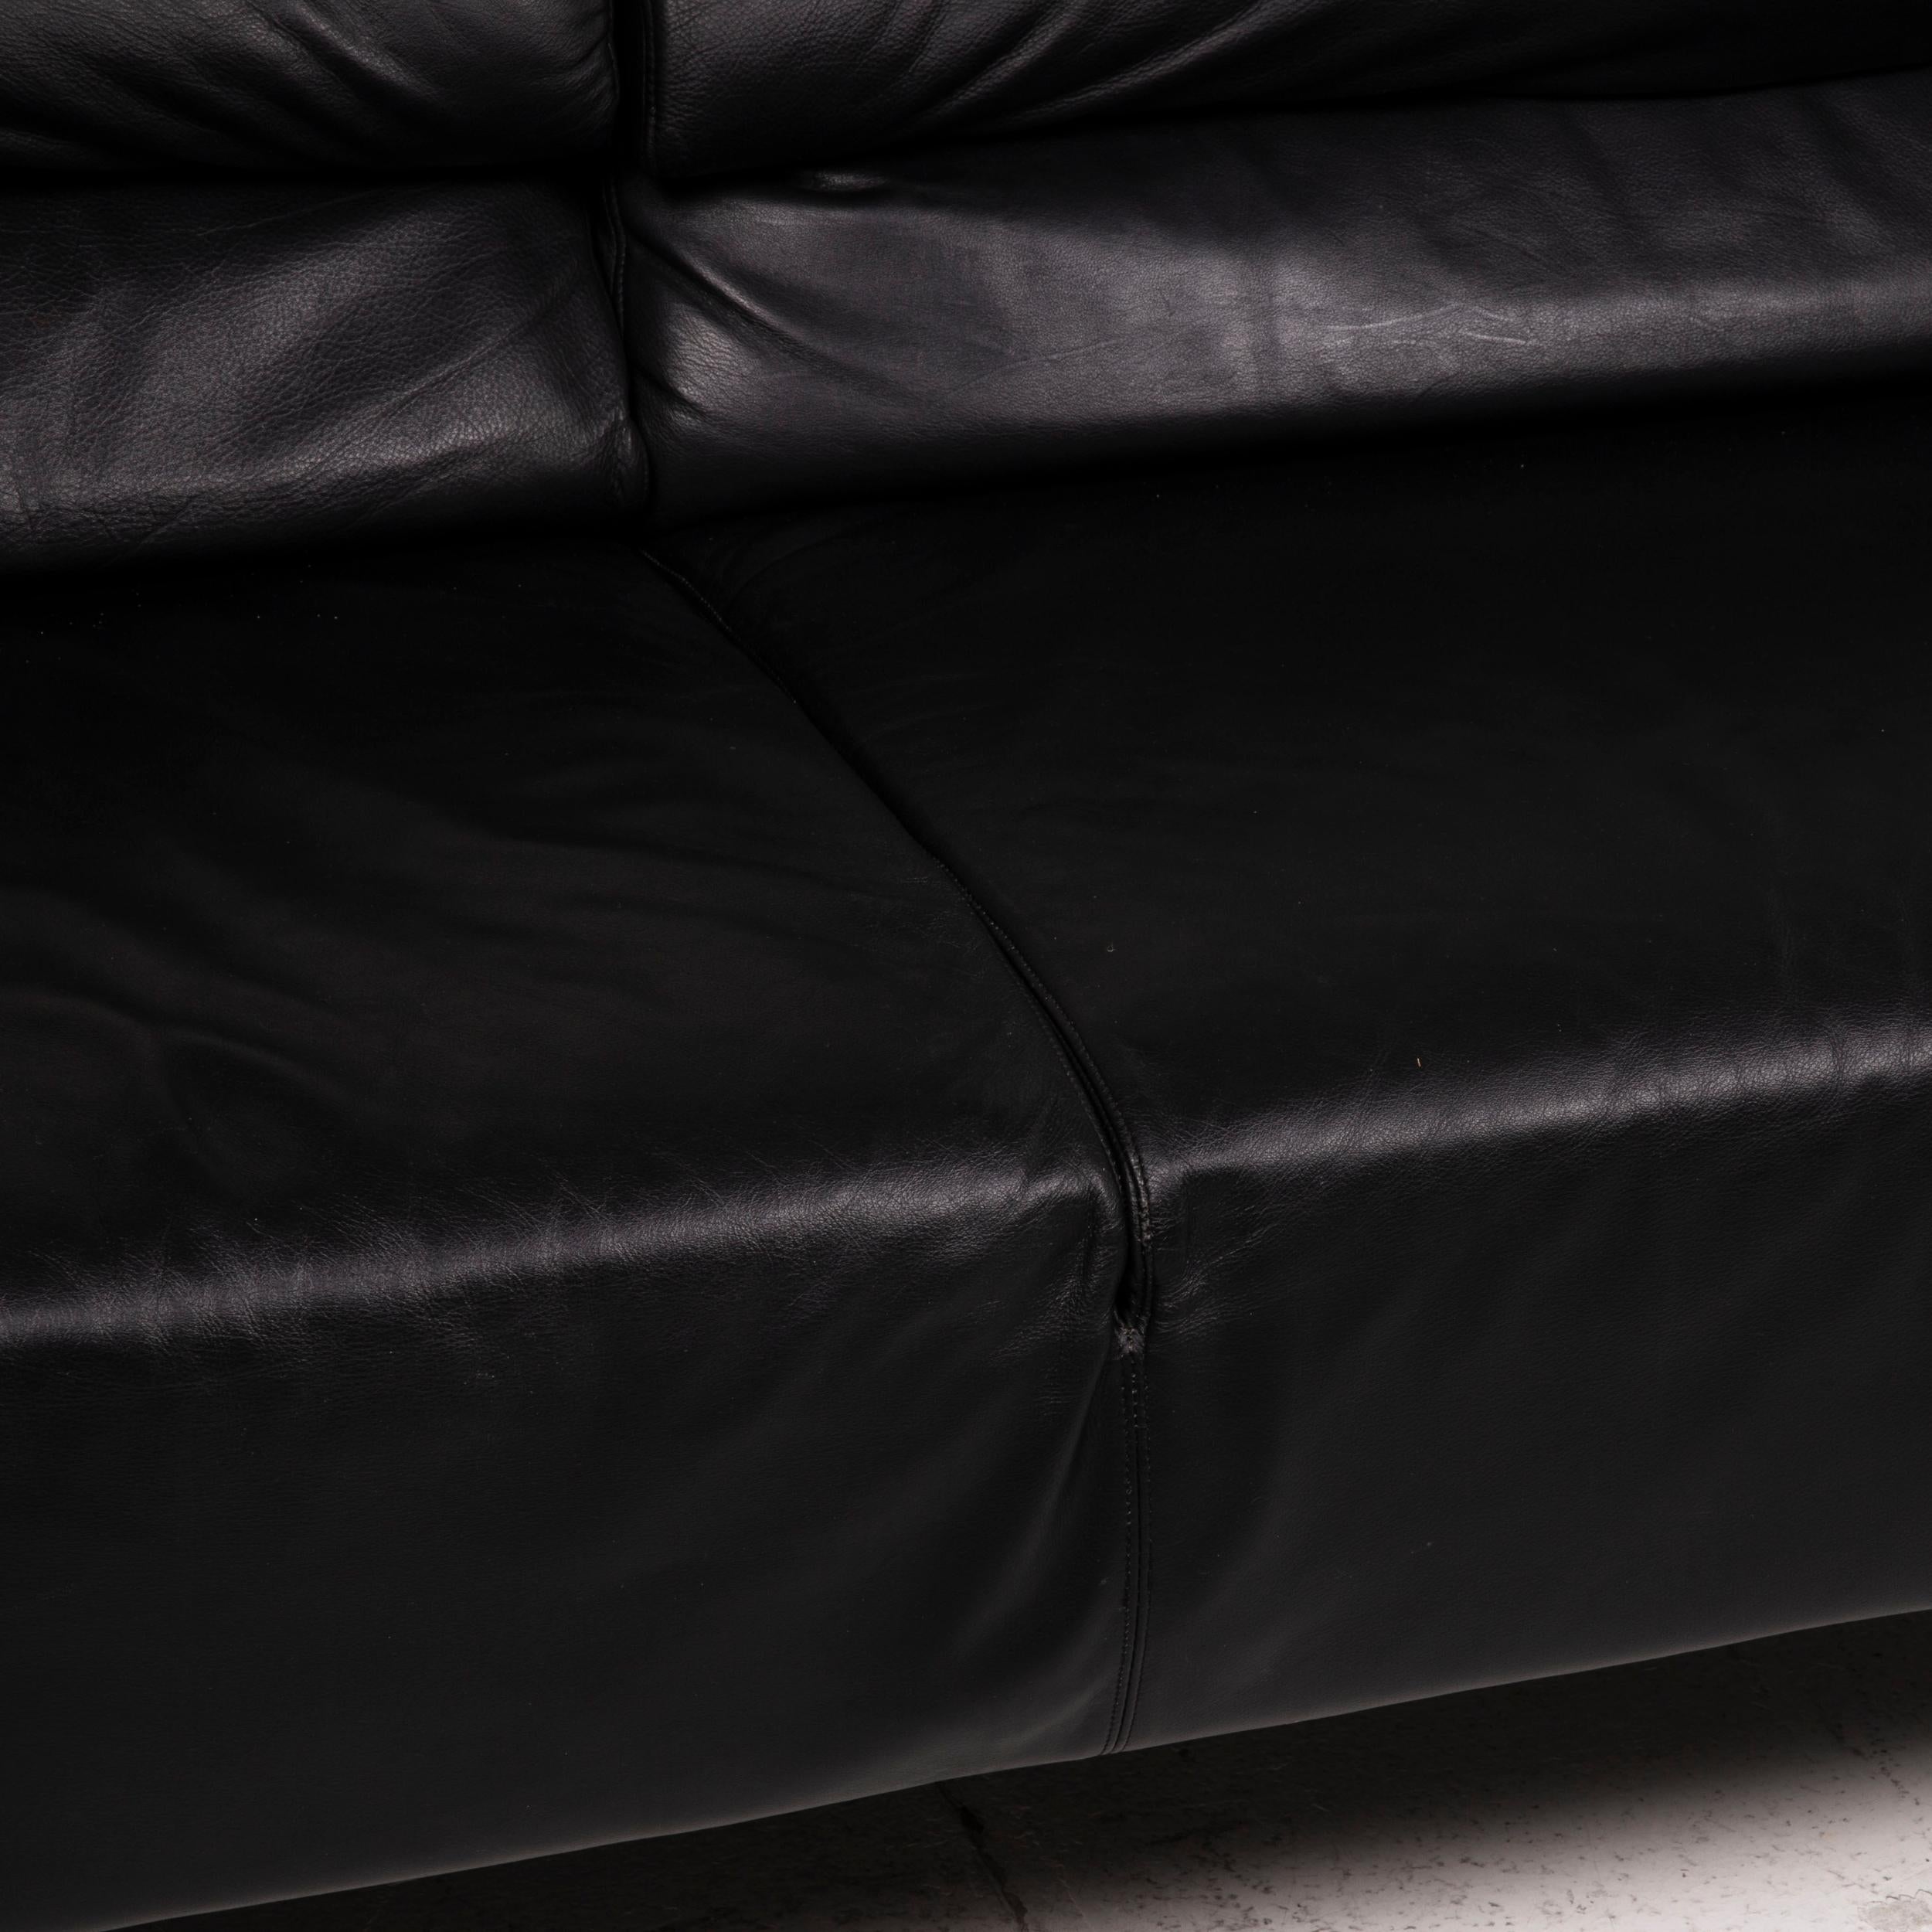 Swiss Strässle Matteo Leather Sofa Black Two-Seater Function Relax Function Couch